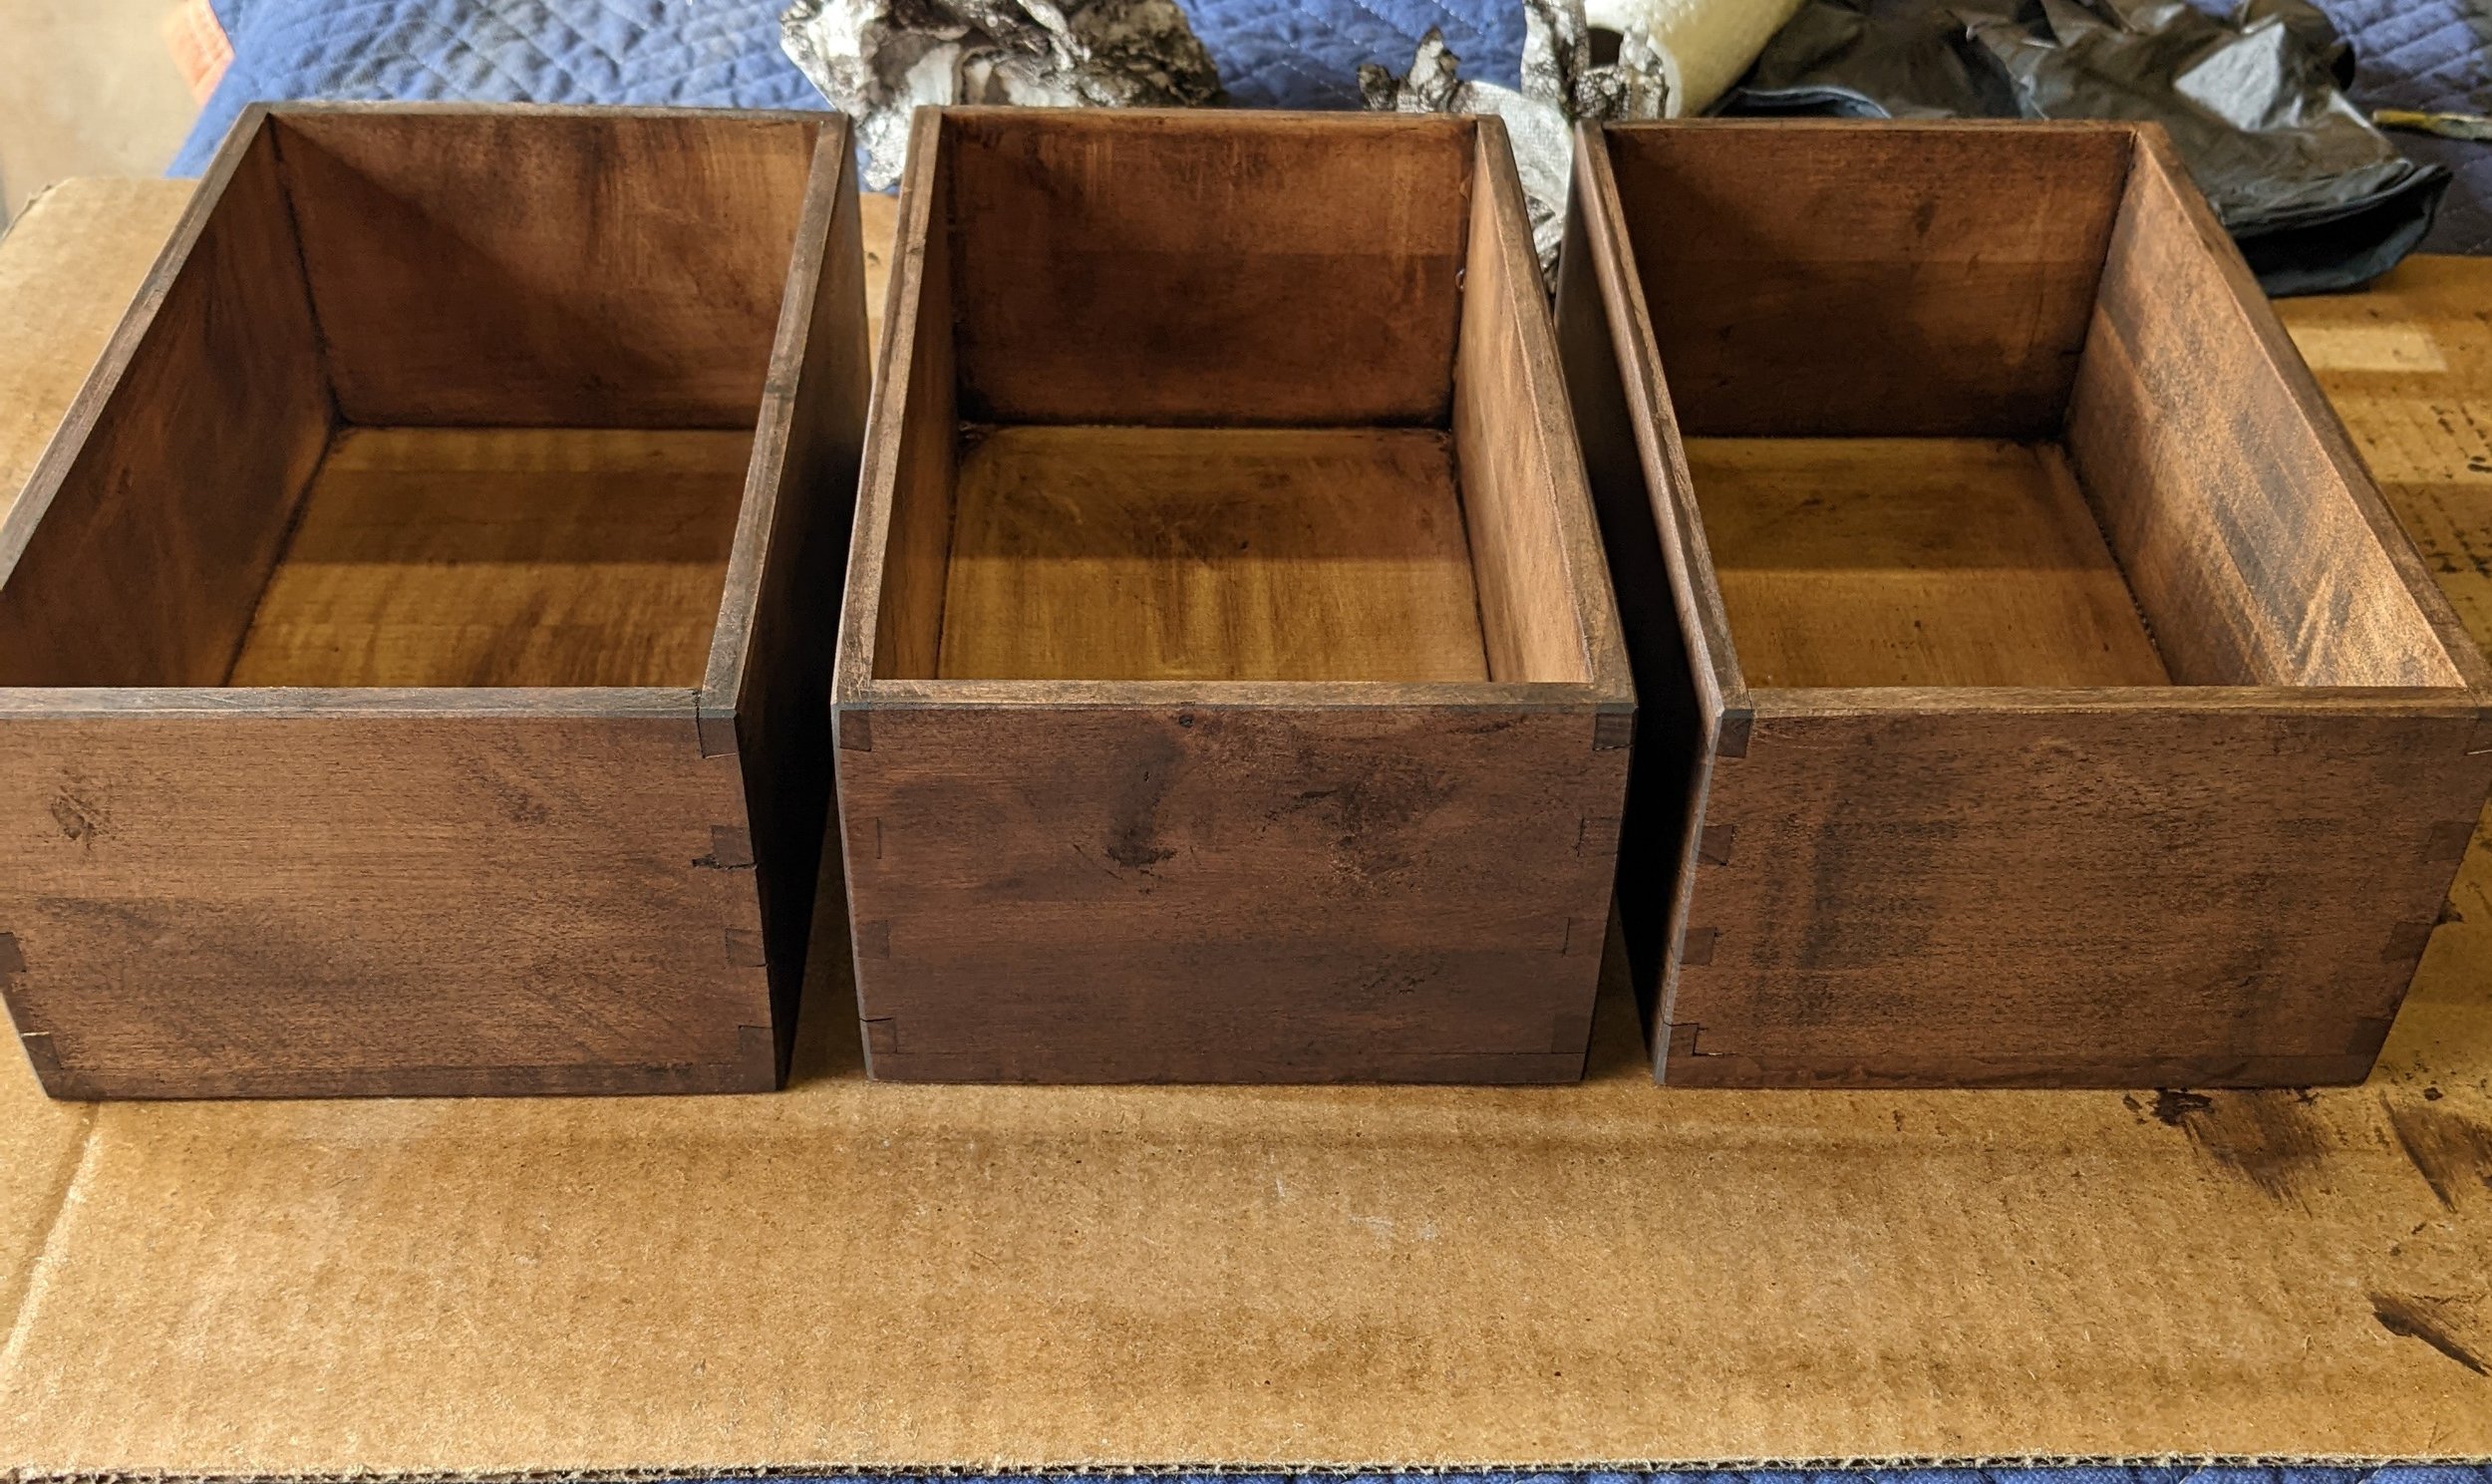 The Dovetailed Storage Boxes - Timbernation